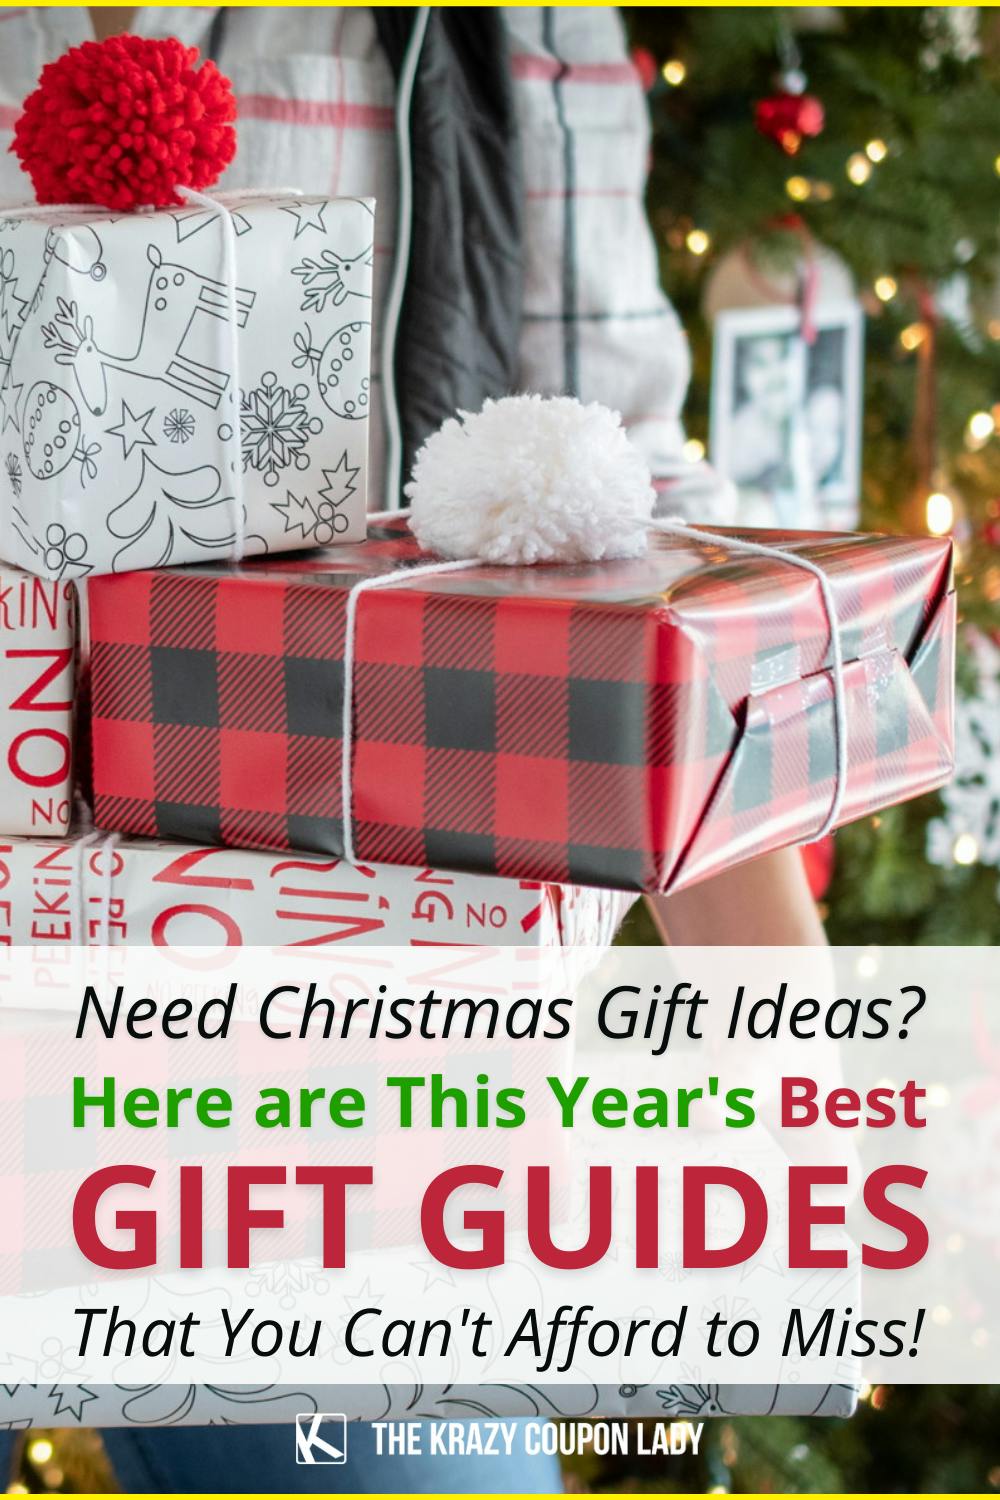 Need Gift Ideas? 7 Spot-On Gift Guides for Everyone on the List